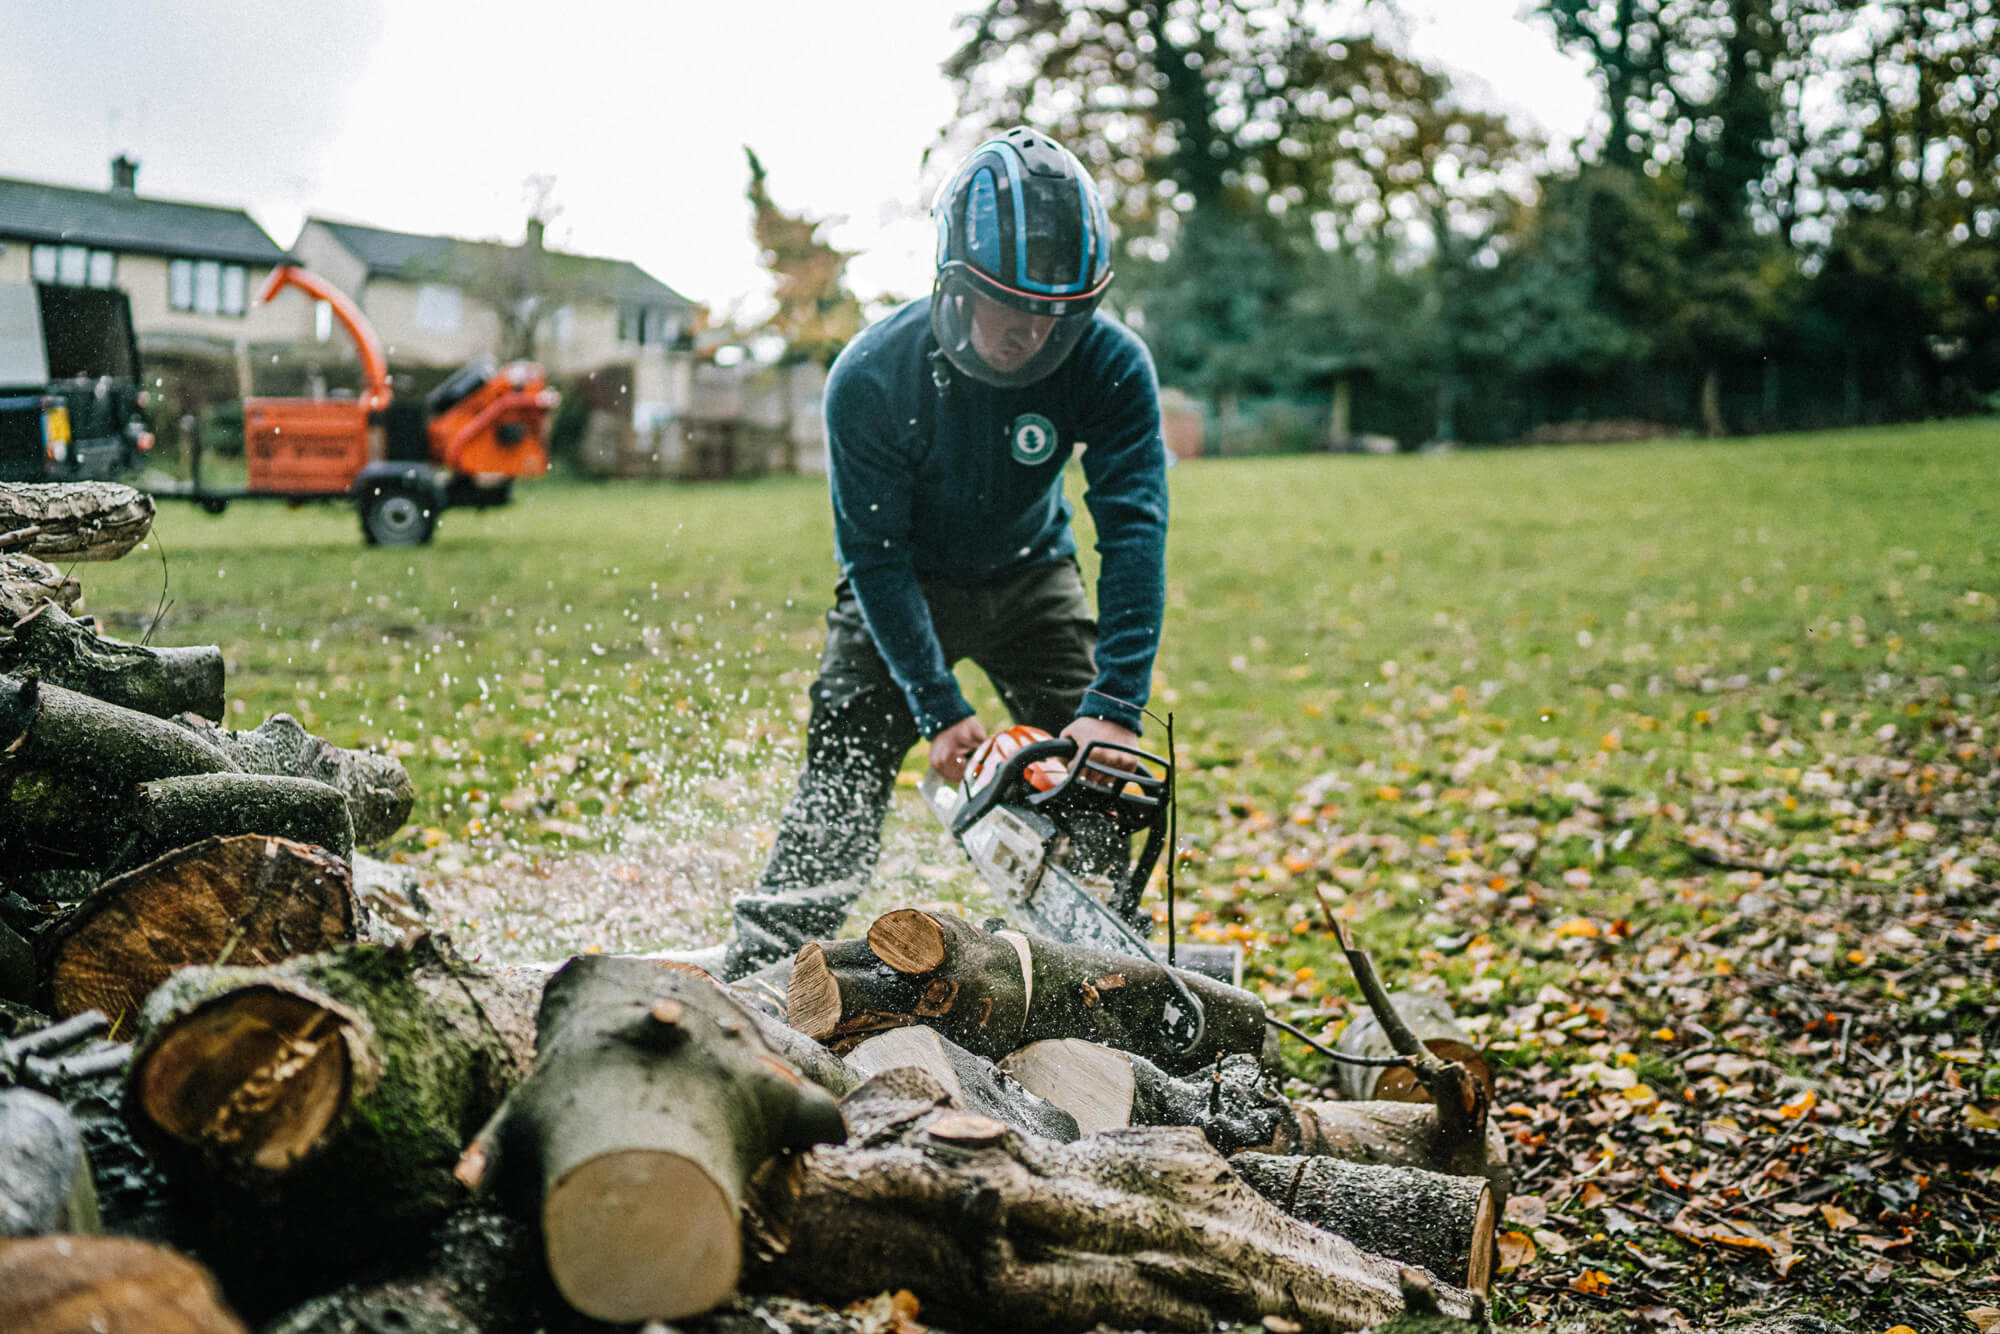 An Arborist from the Silver Oak team using a chainsaw cutting logs